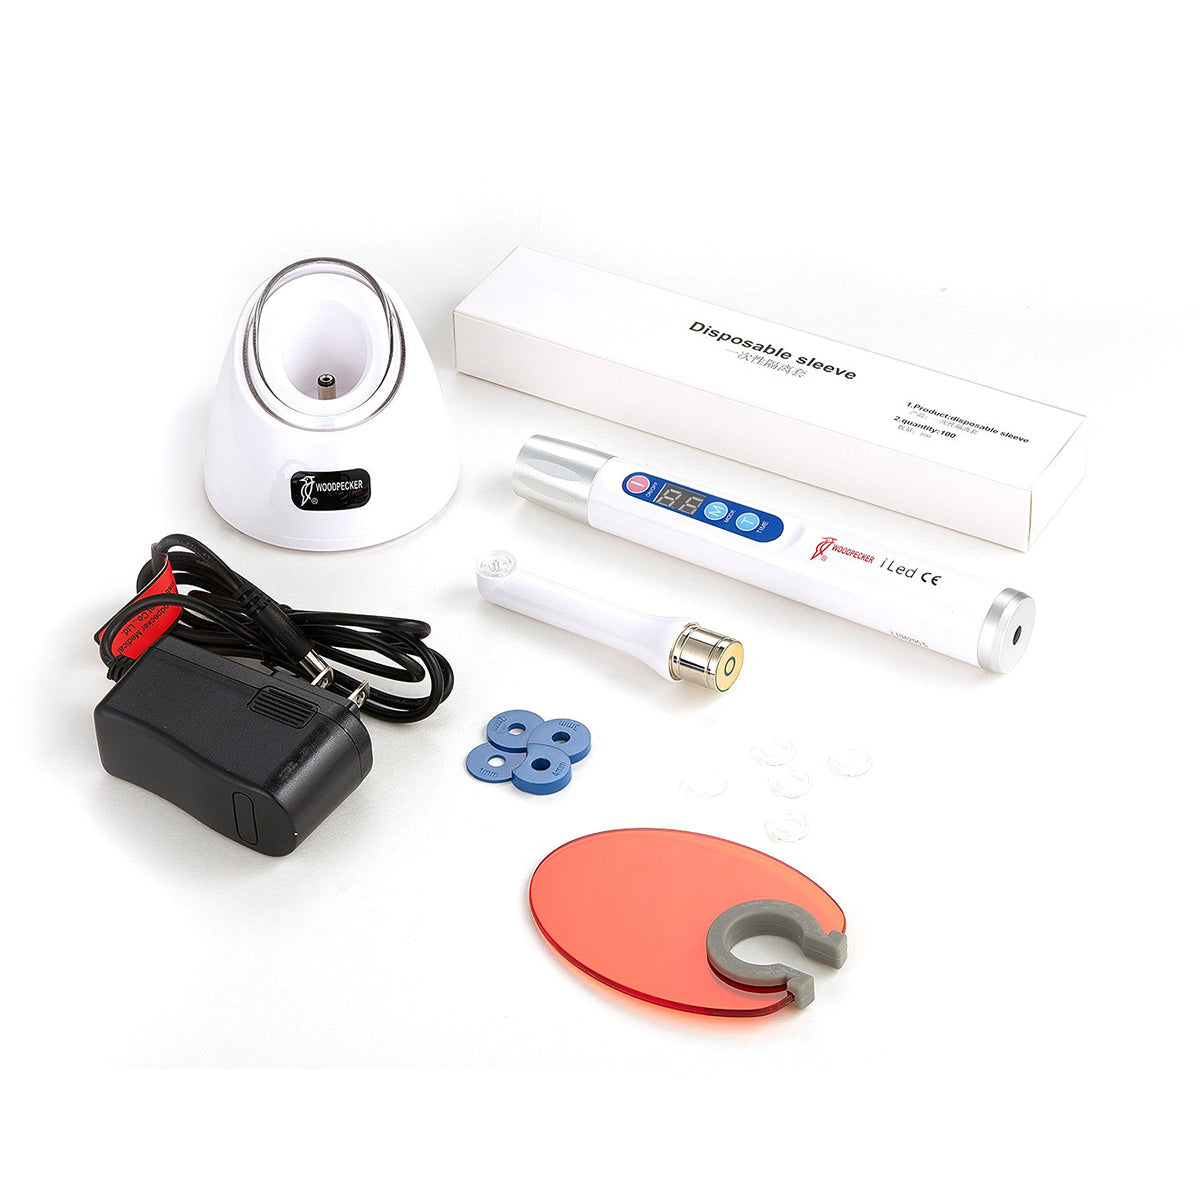 Woodpecker iLED Curing Light Wireless 360° Rotary 1 Sec Curing White - Pairaydental.com